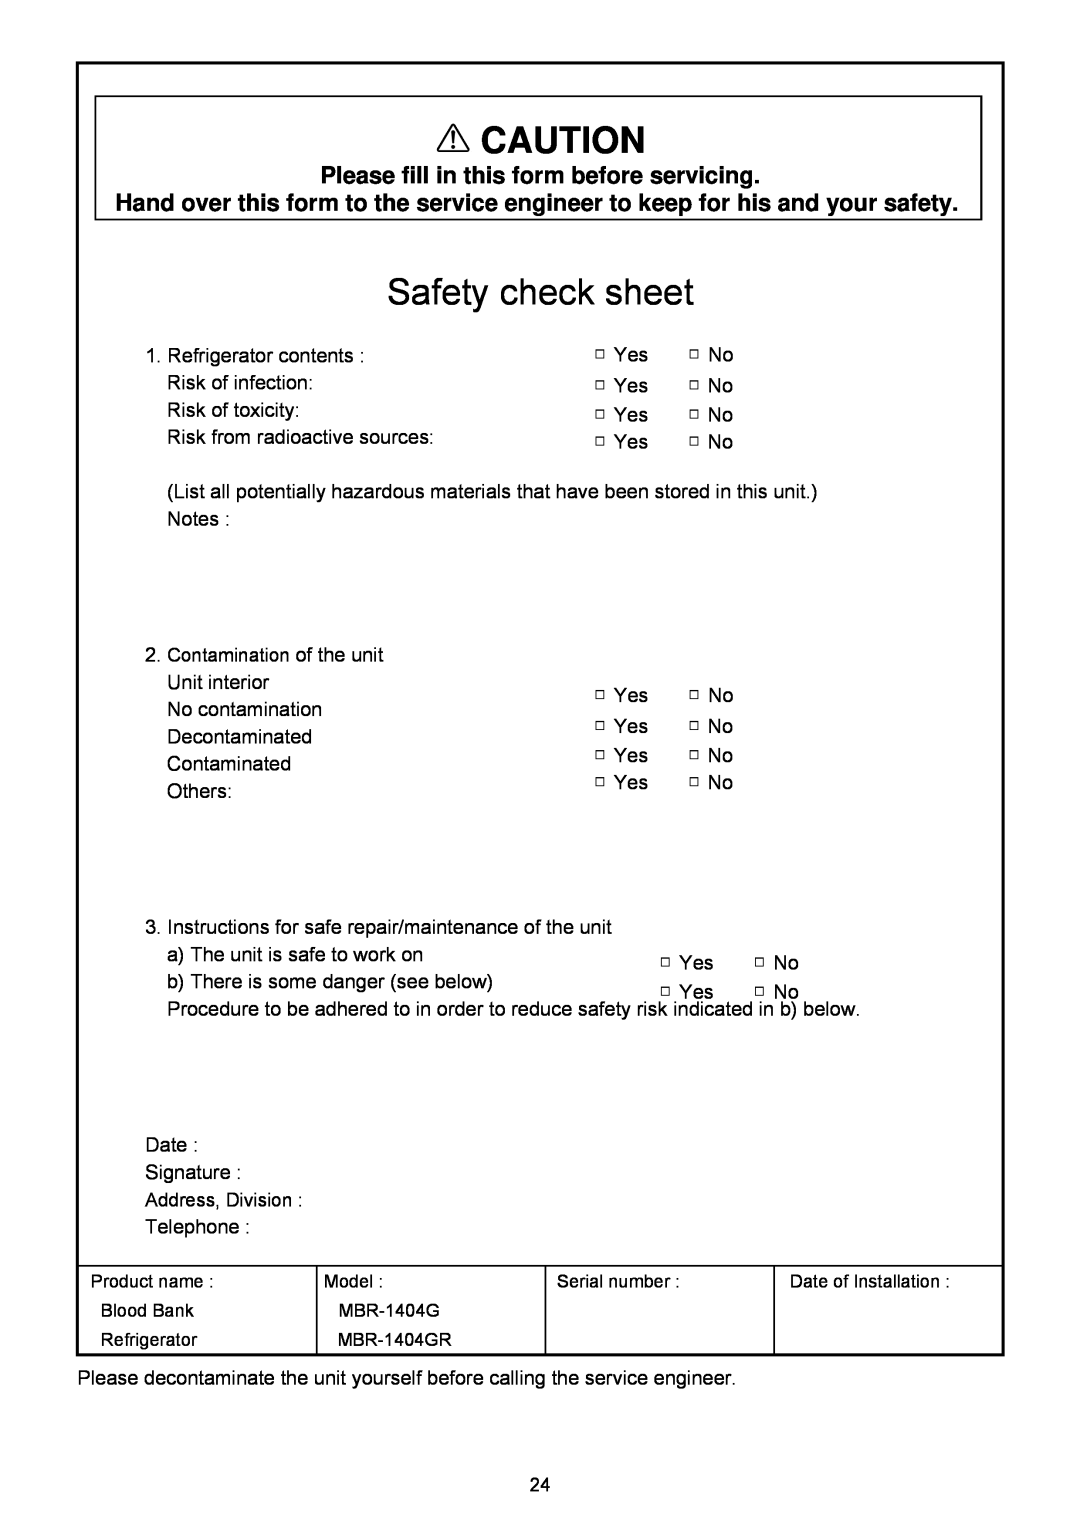 Sanyo MBR-1404GR instruction manual Safety check sheet, Please fill in this form before servicing 